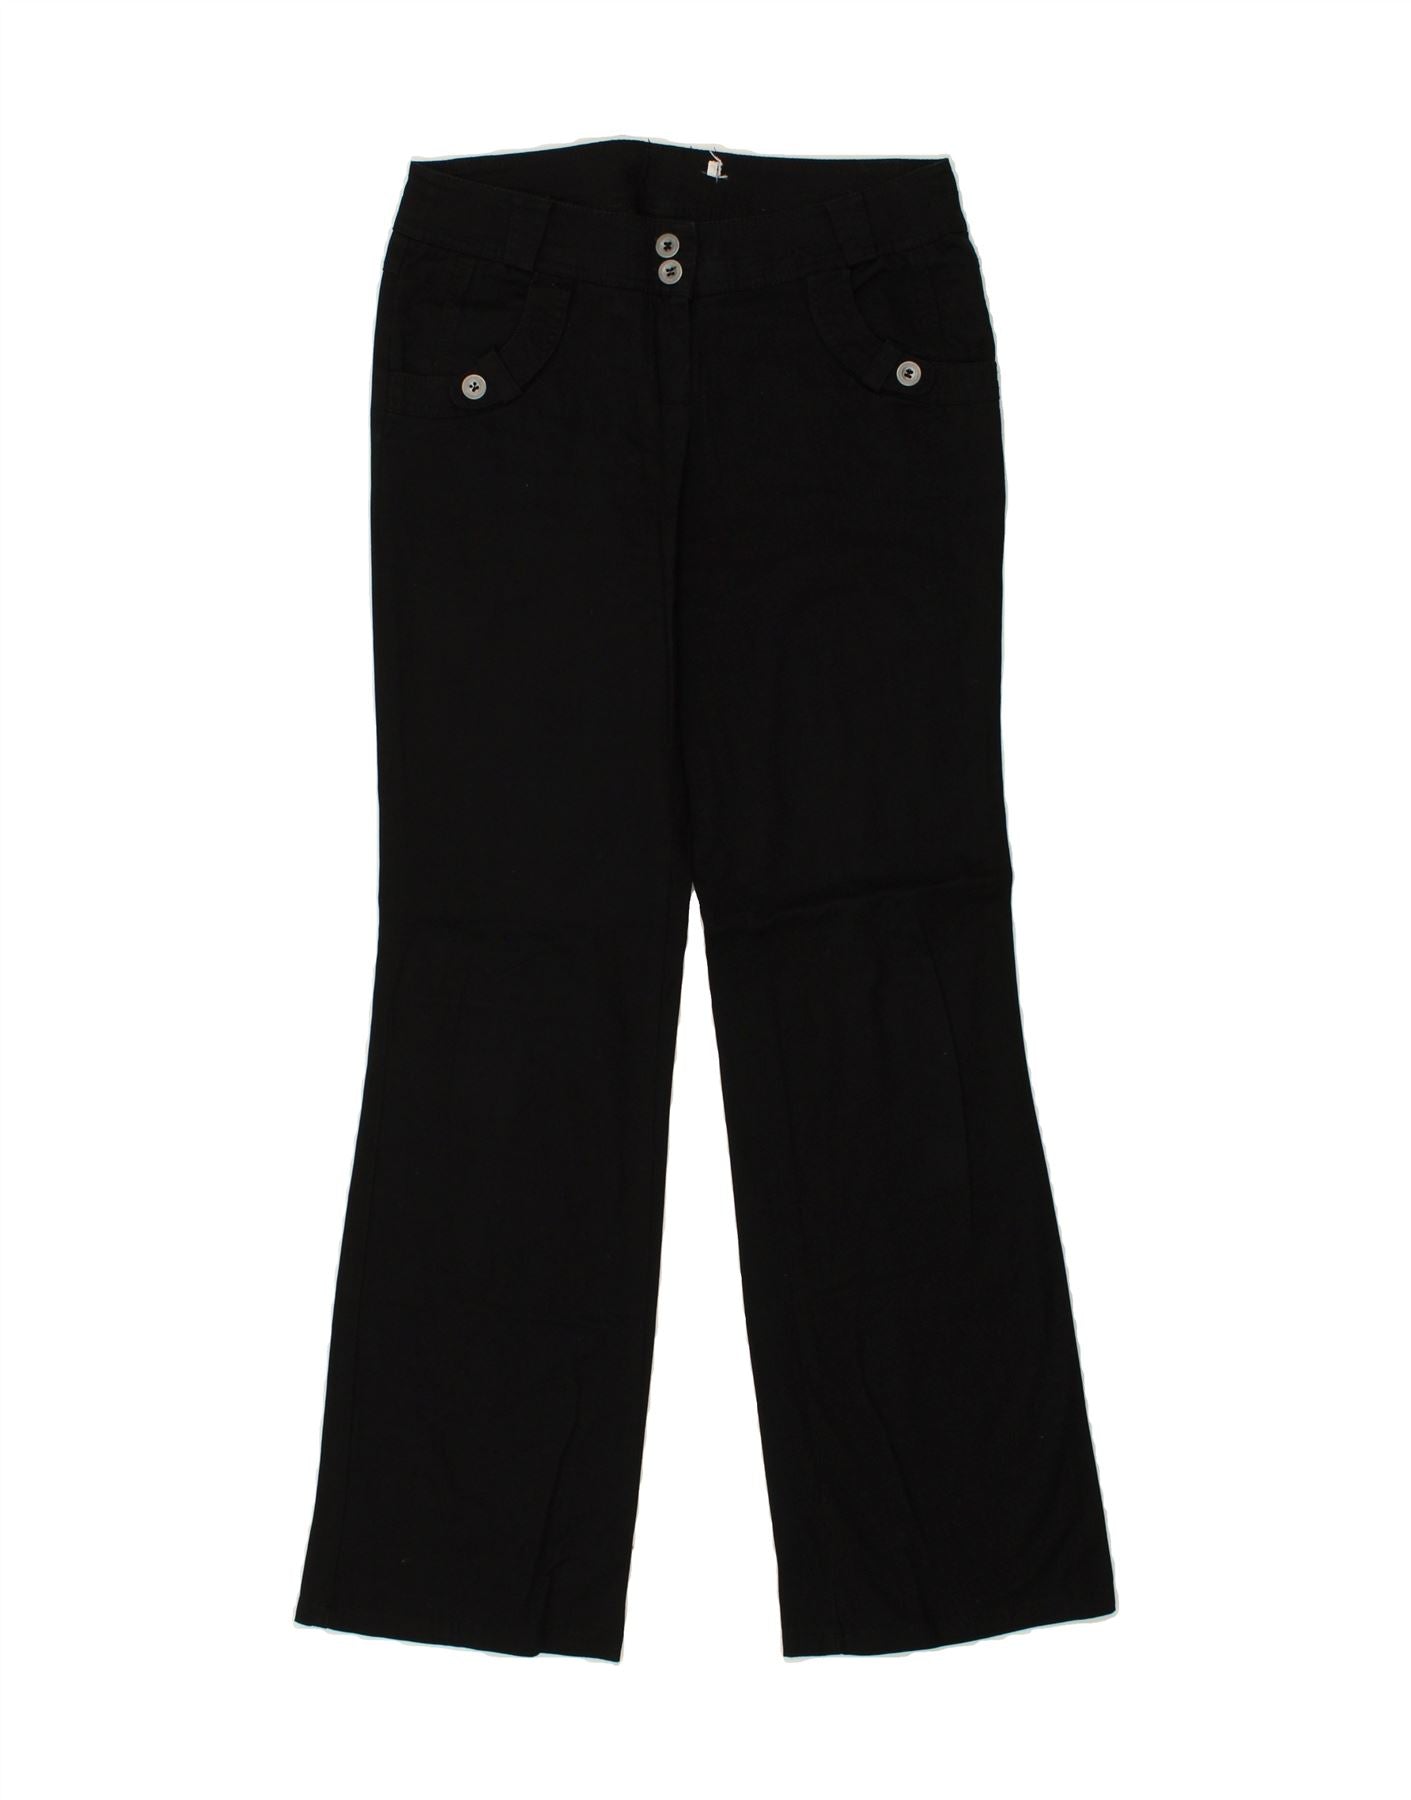 VINTAGE Womens Bootcut Casual Trousers W30 L33 Navy Blue